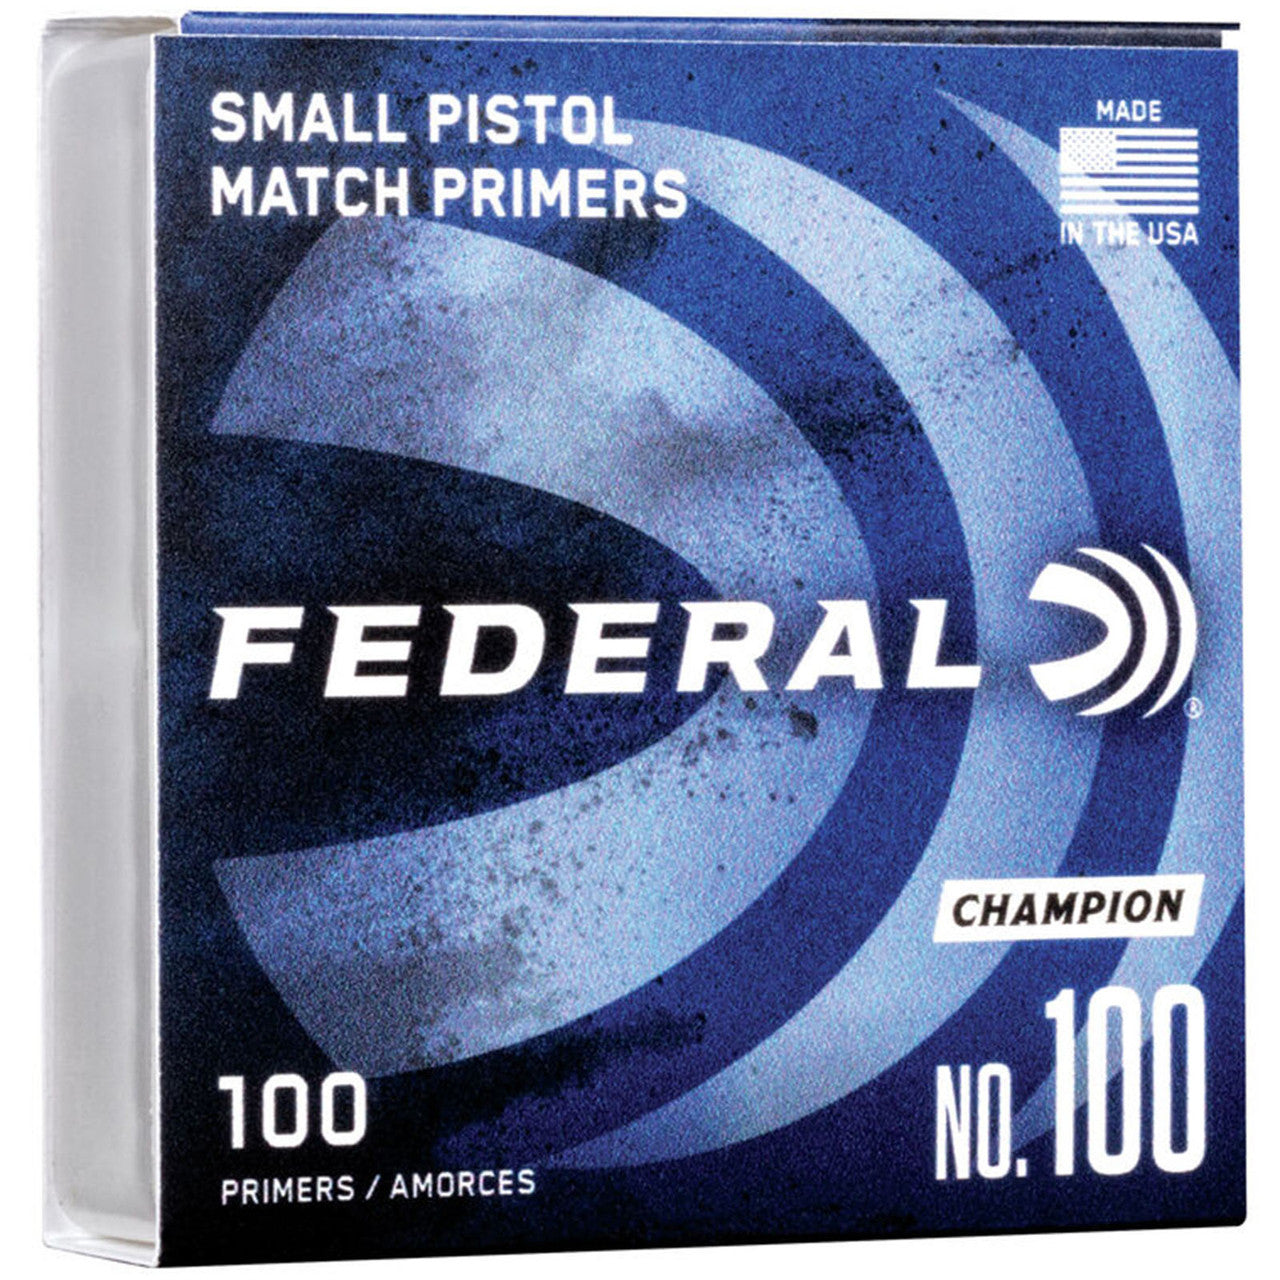 Federal Match Small Pistol Primers #100